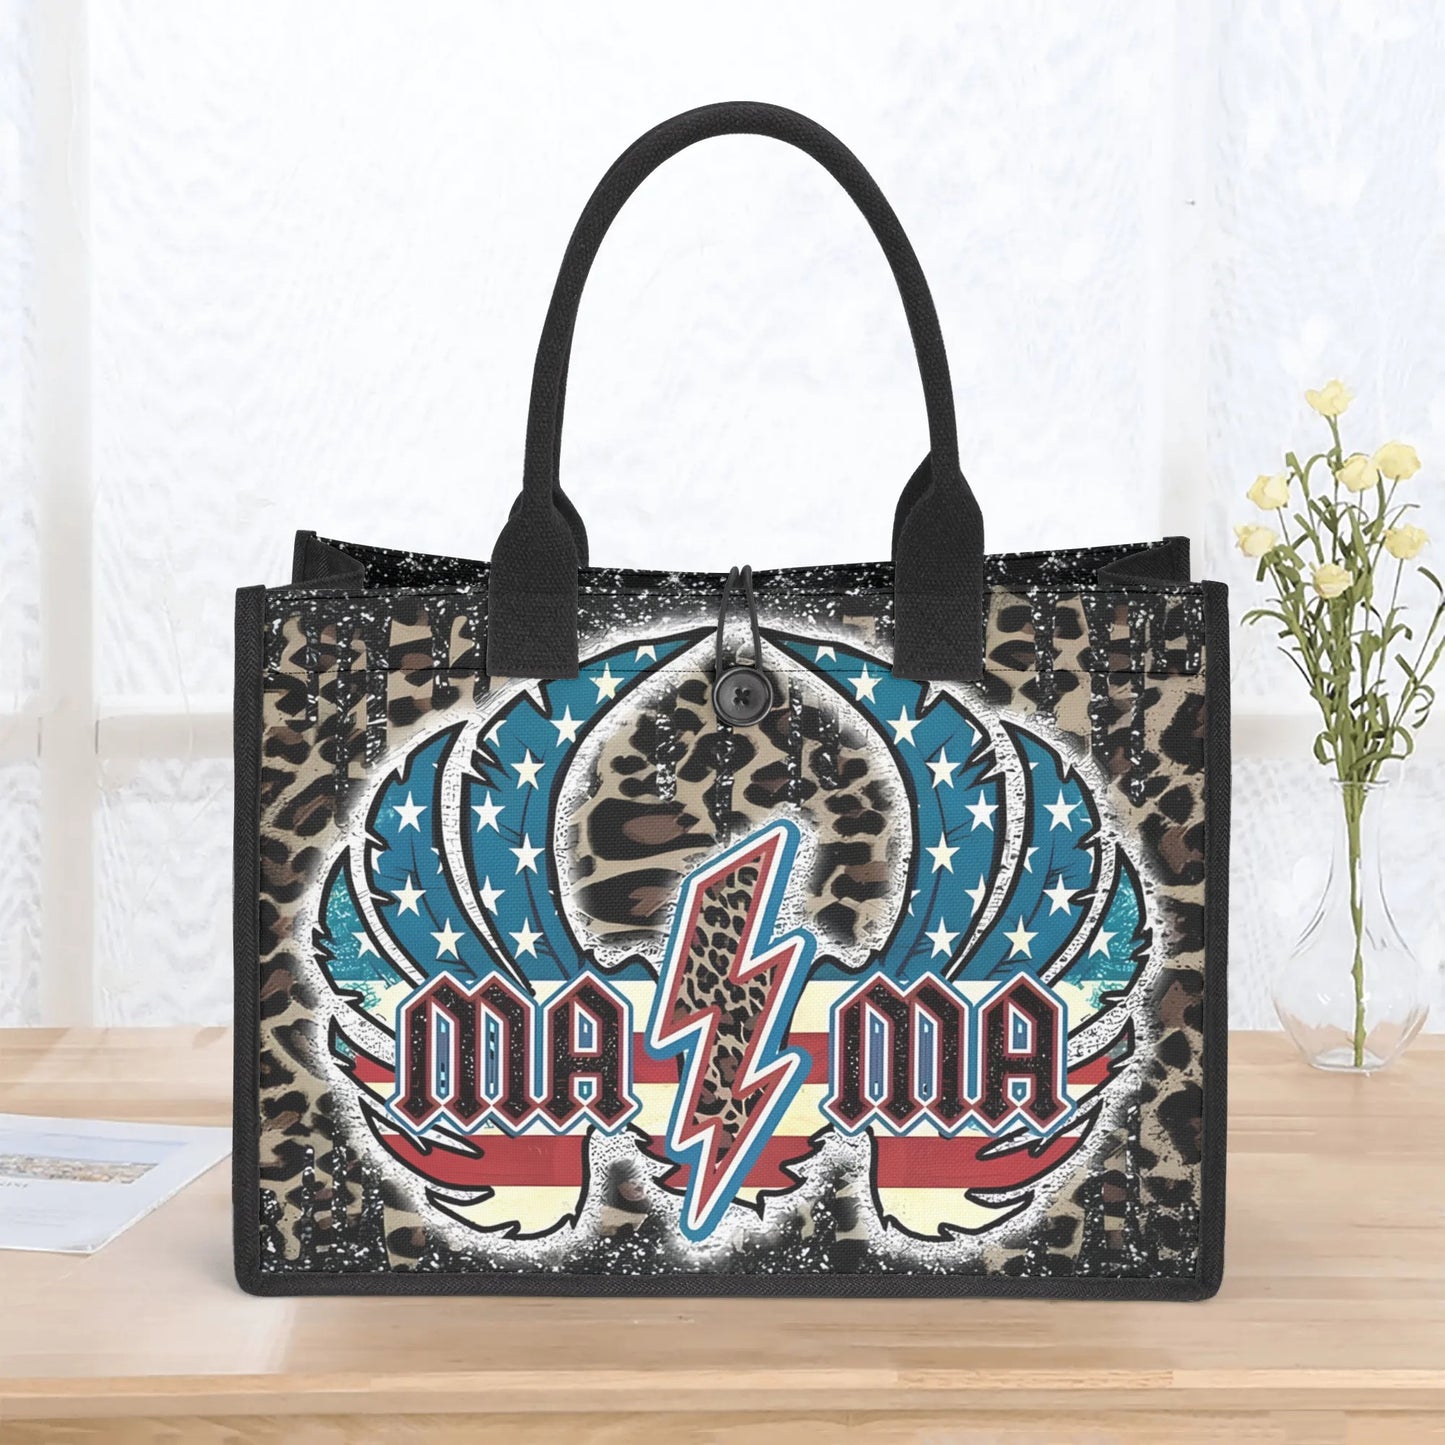 Standard All-Over Print Canvas Tote Bag（2 layers）